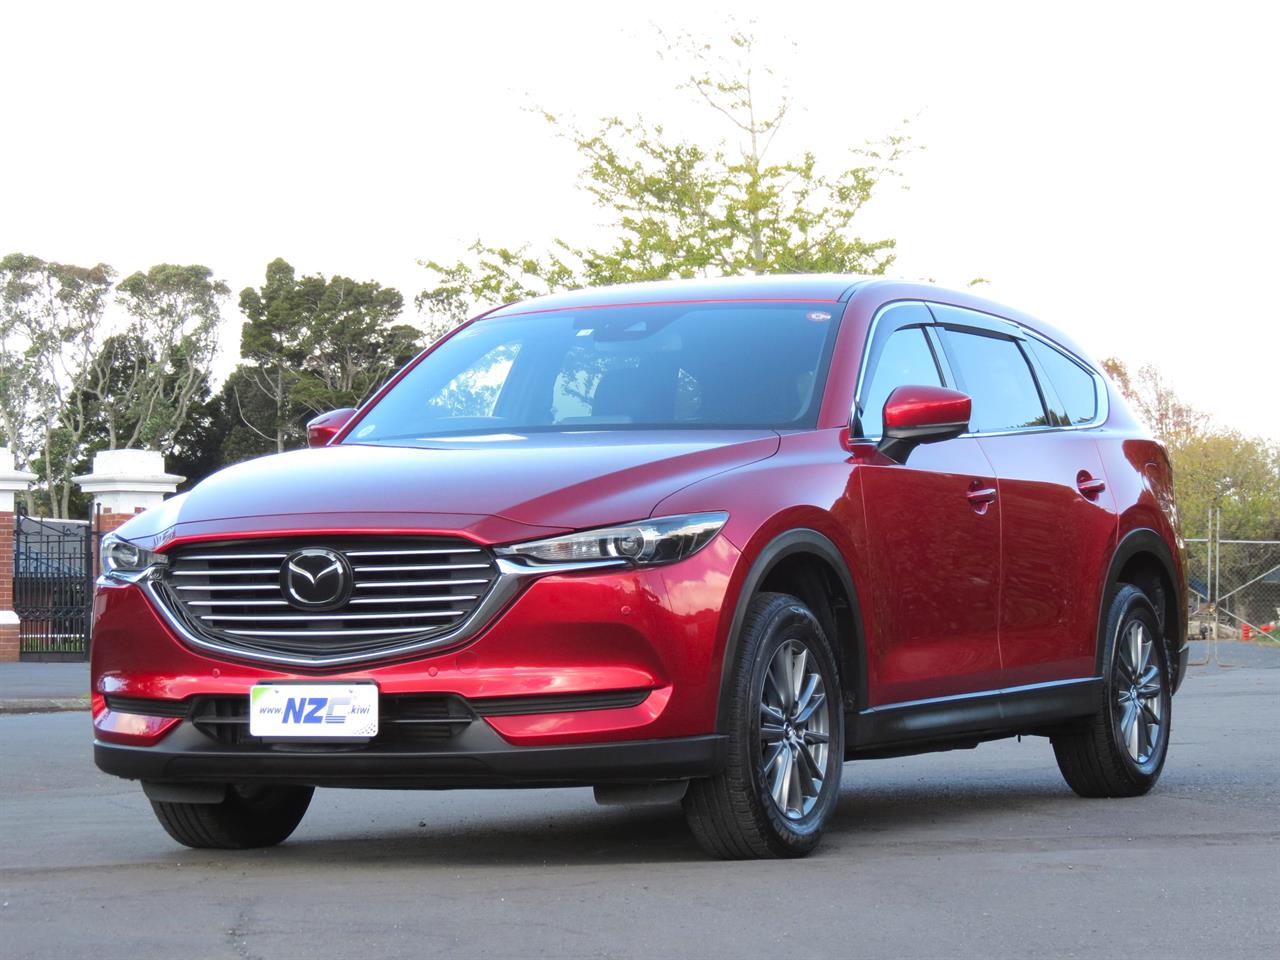 2018 Mazda CX-8 only $77 weekly